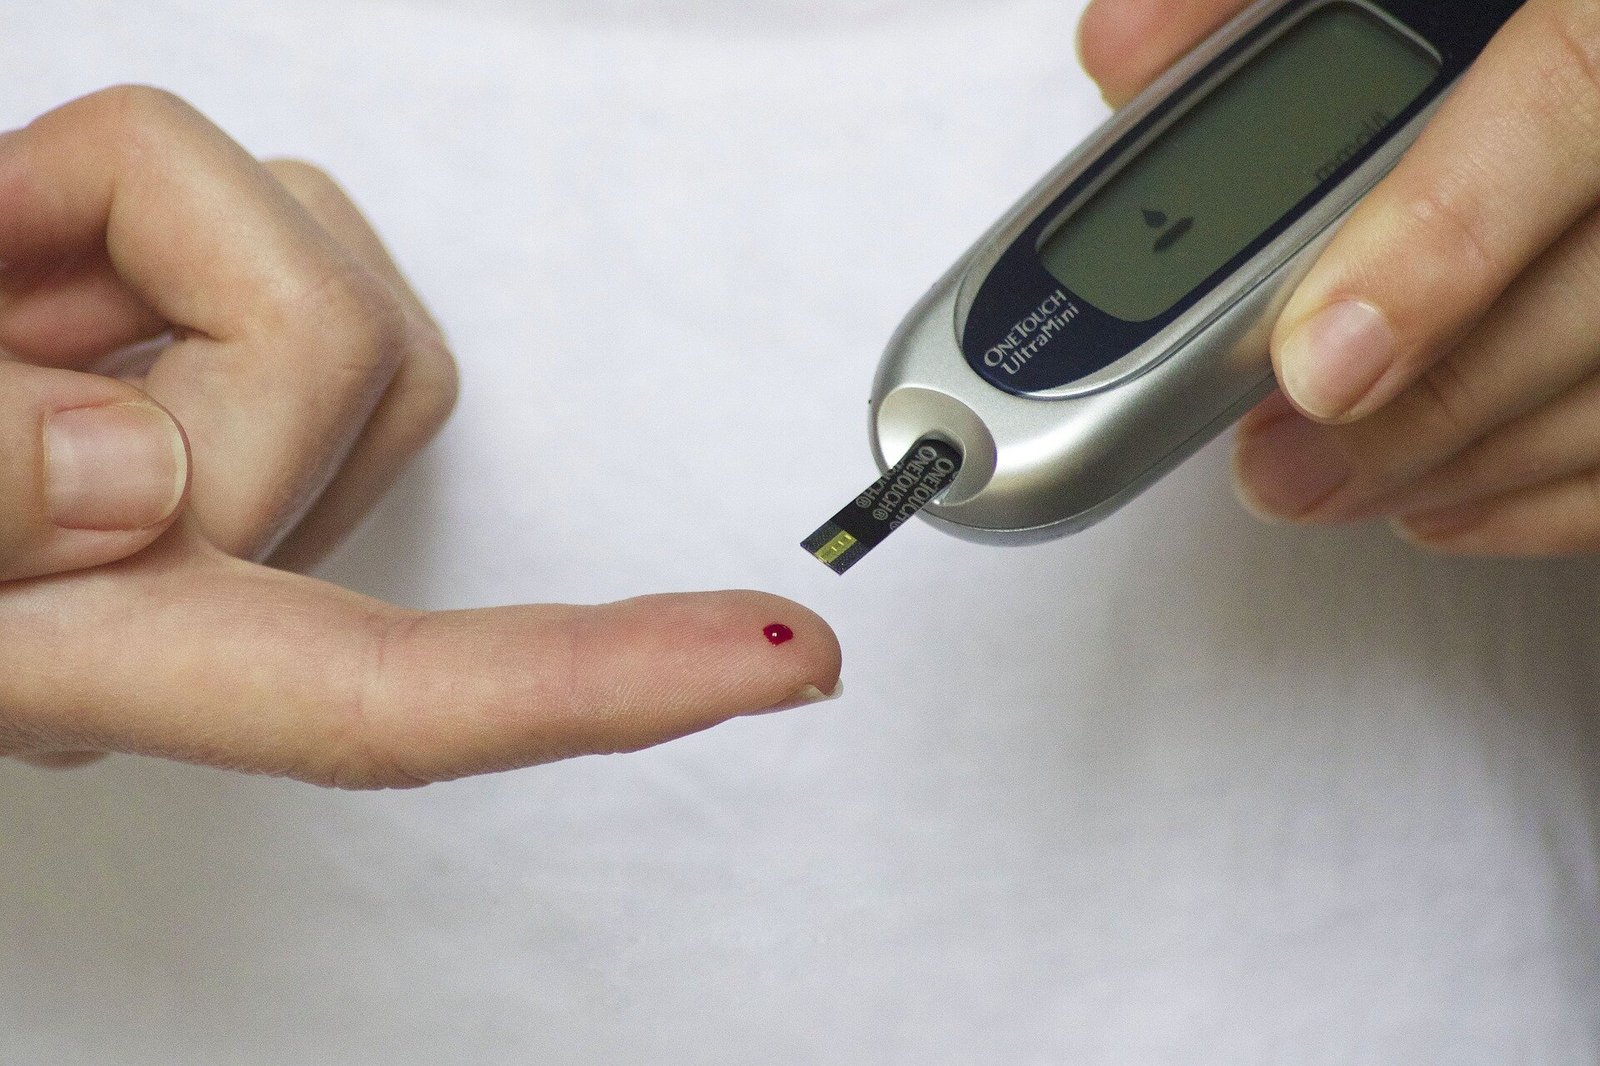 Many type 2 diabetes patients lack potentially lifesaving knowledge about their disease, researchers find